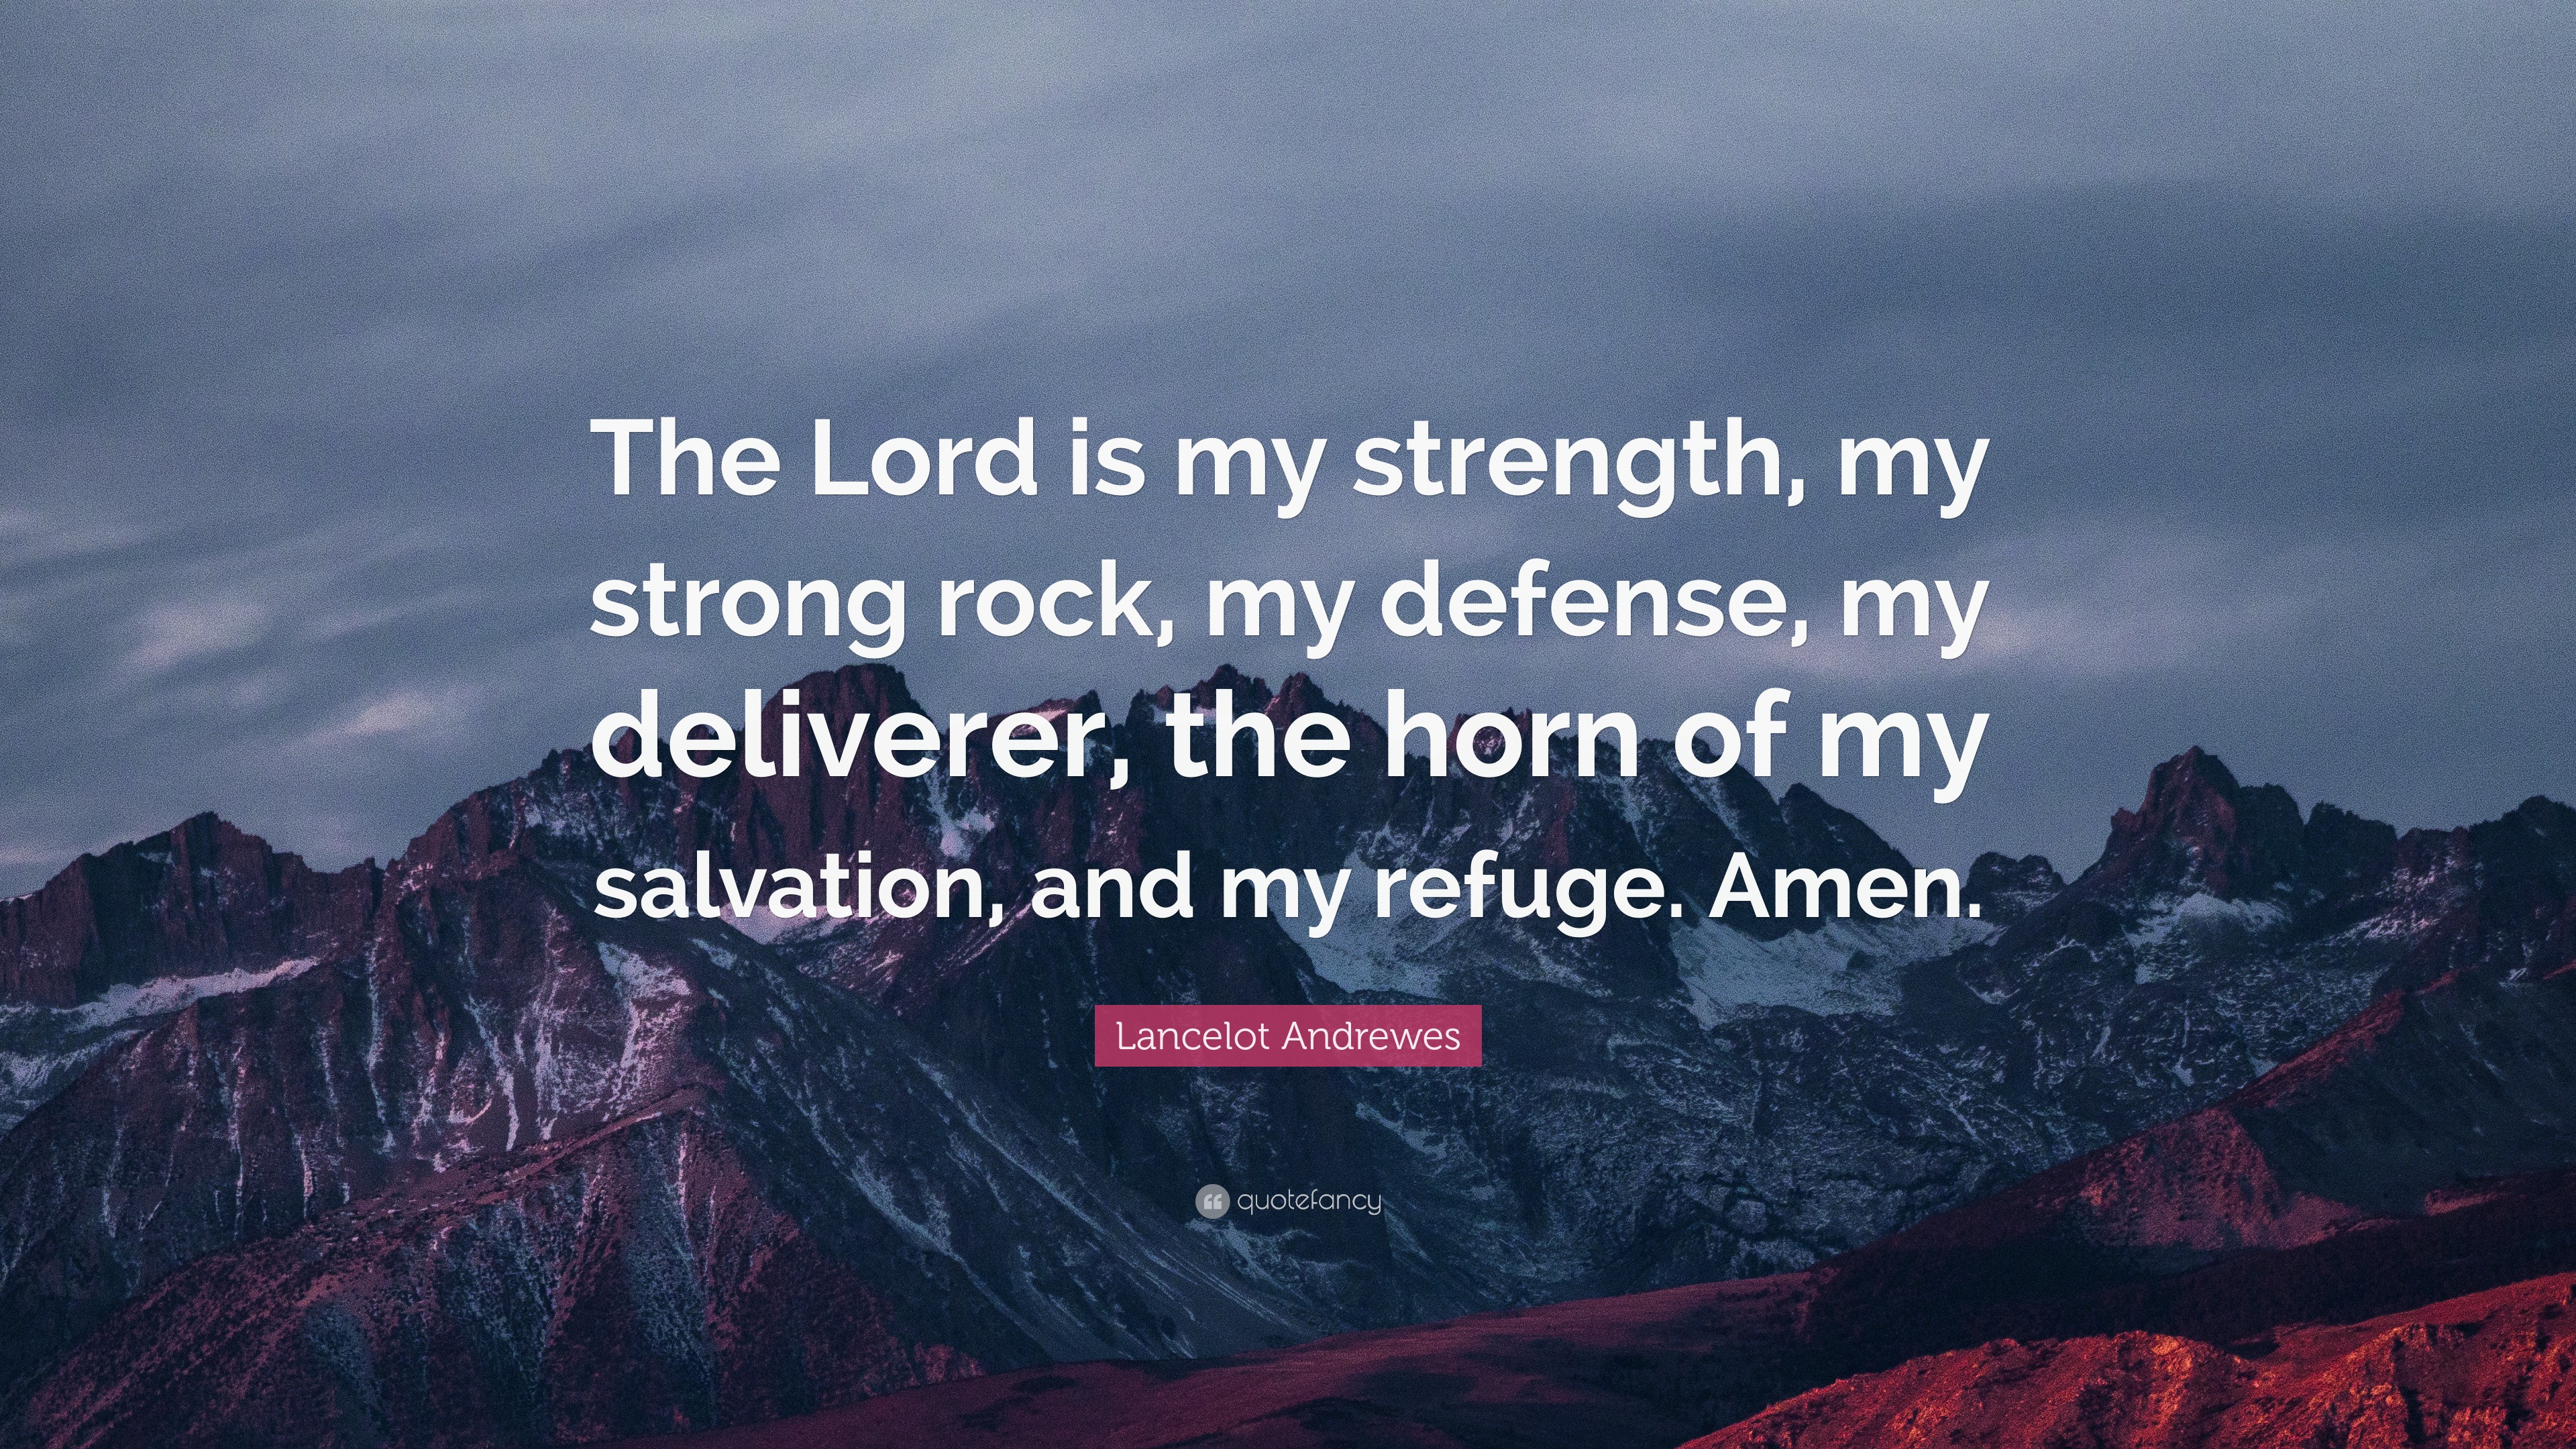 Lancelot Andrewes Quote: “The Lord is my strength, my strong rock, my ...